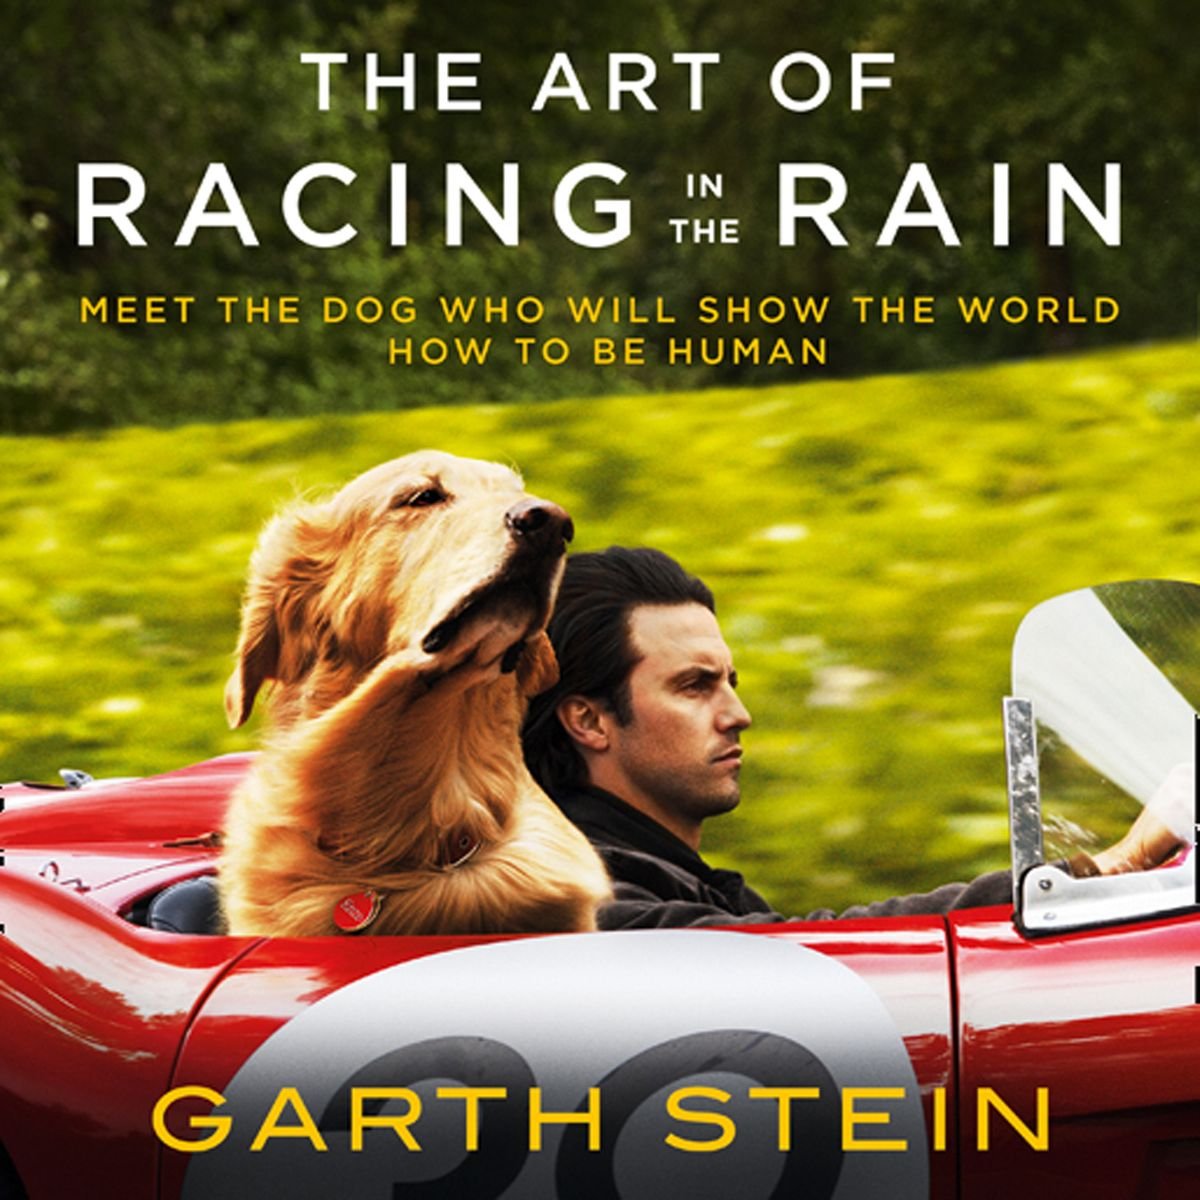 The Art of Racing in the Rain by Garth Stein Audiobook